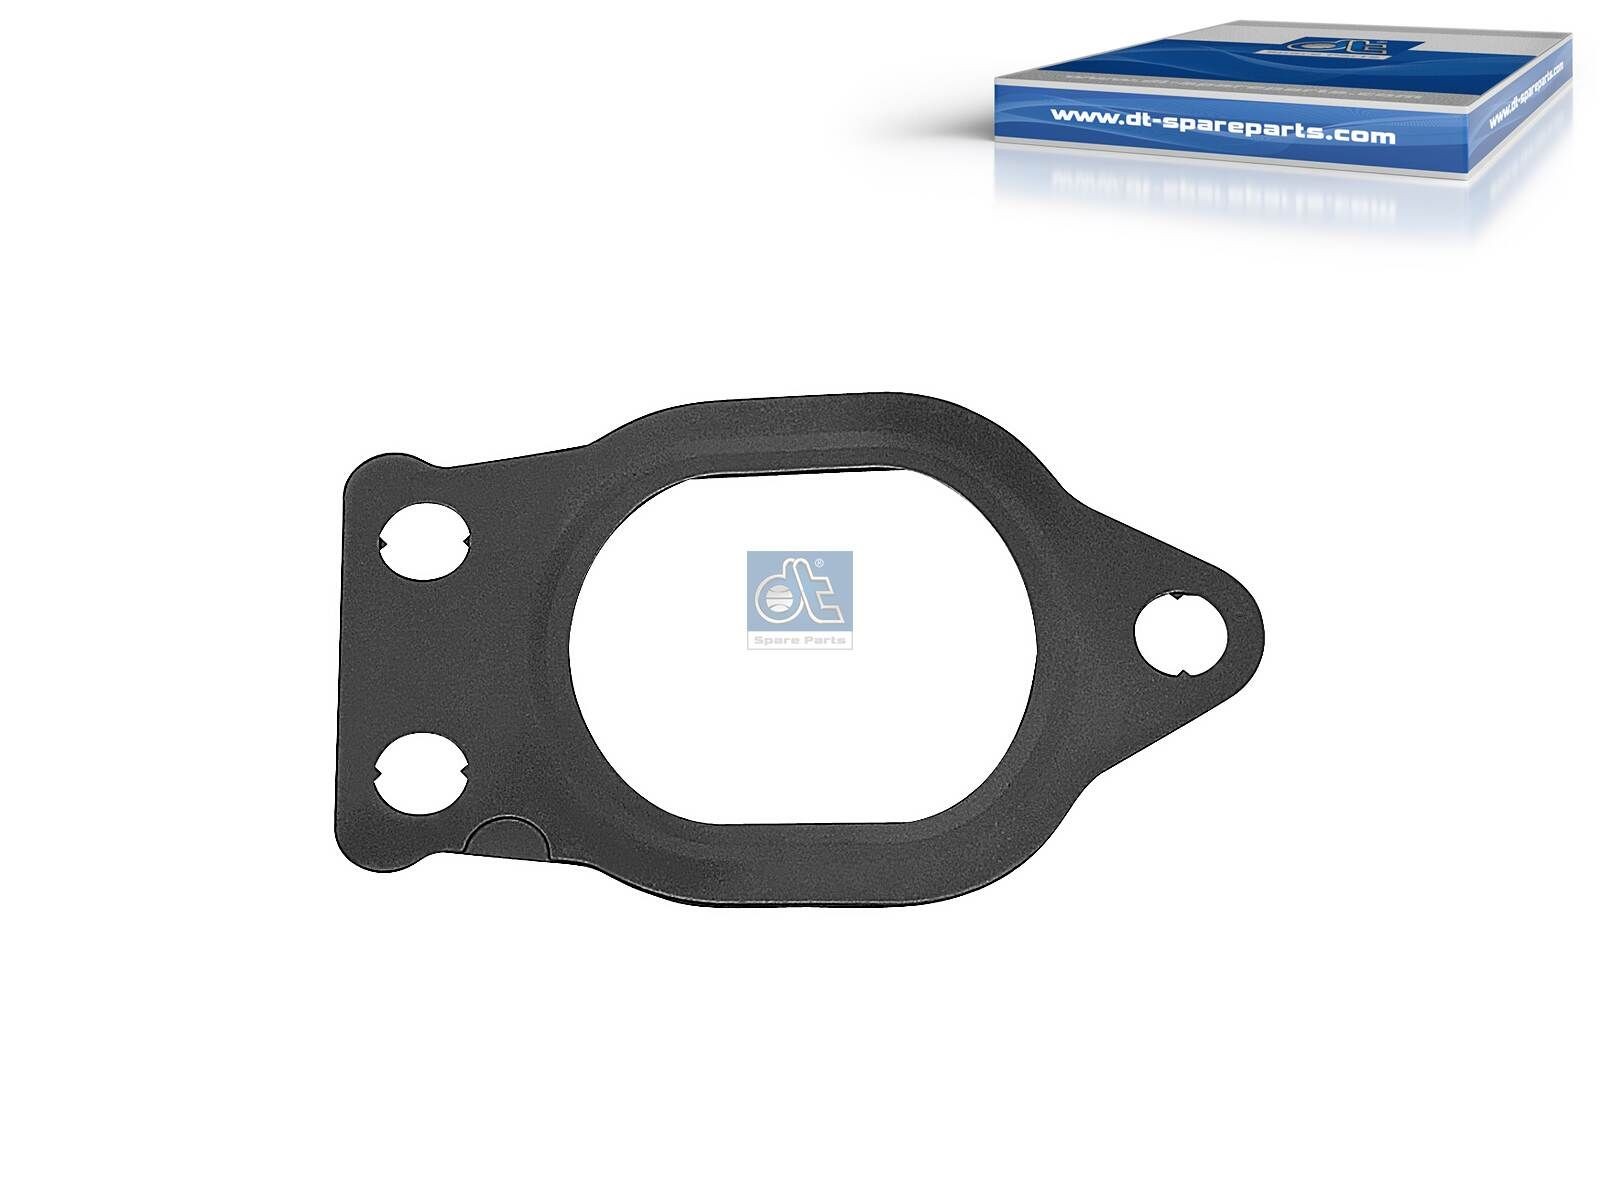 DT Spare Parts Exhaust collector gasket 5.41156